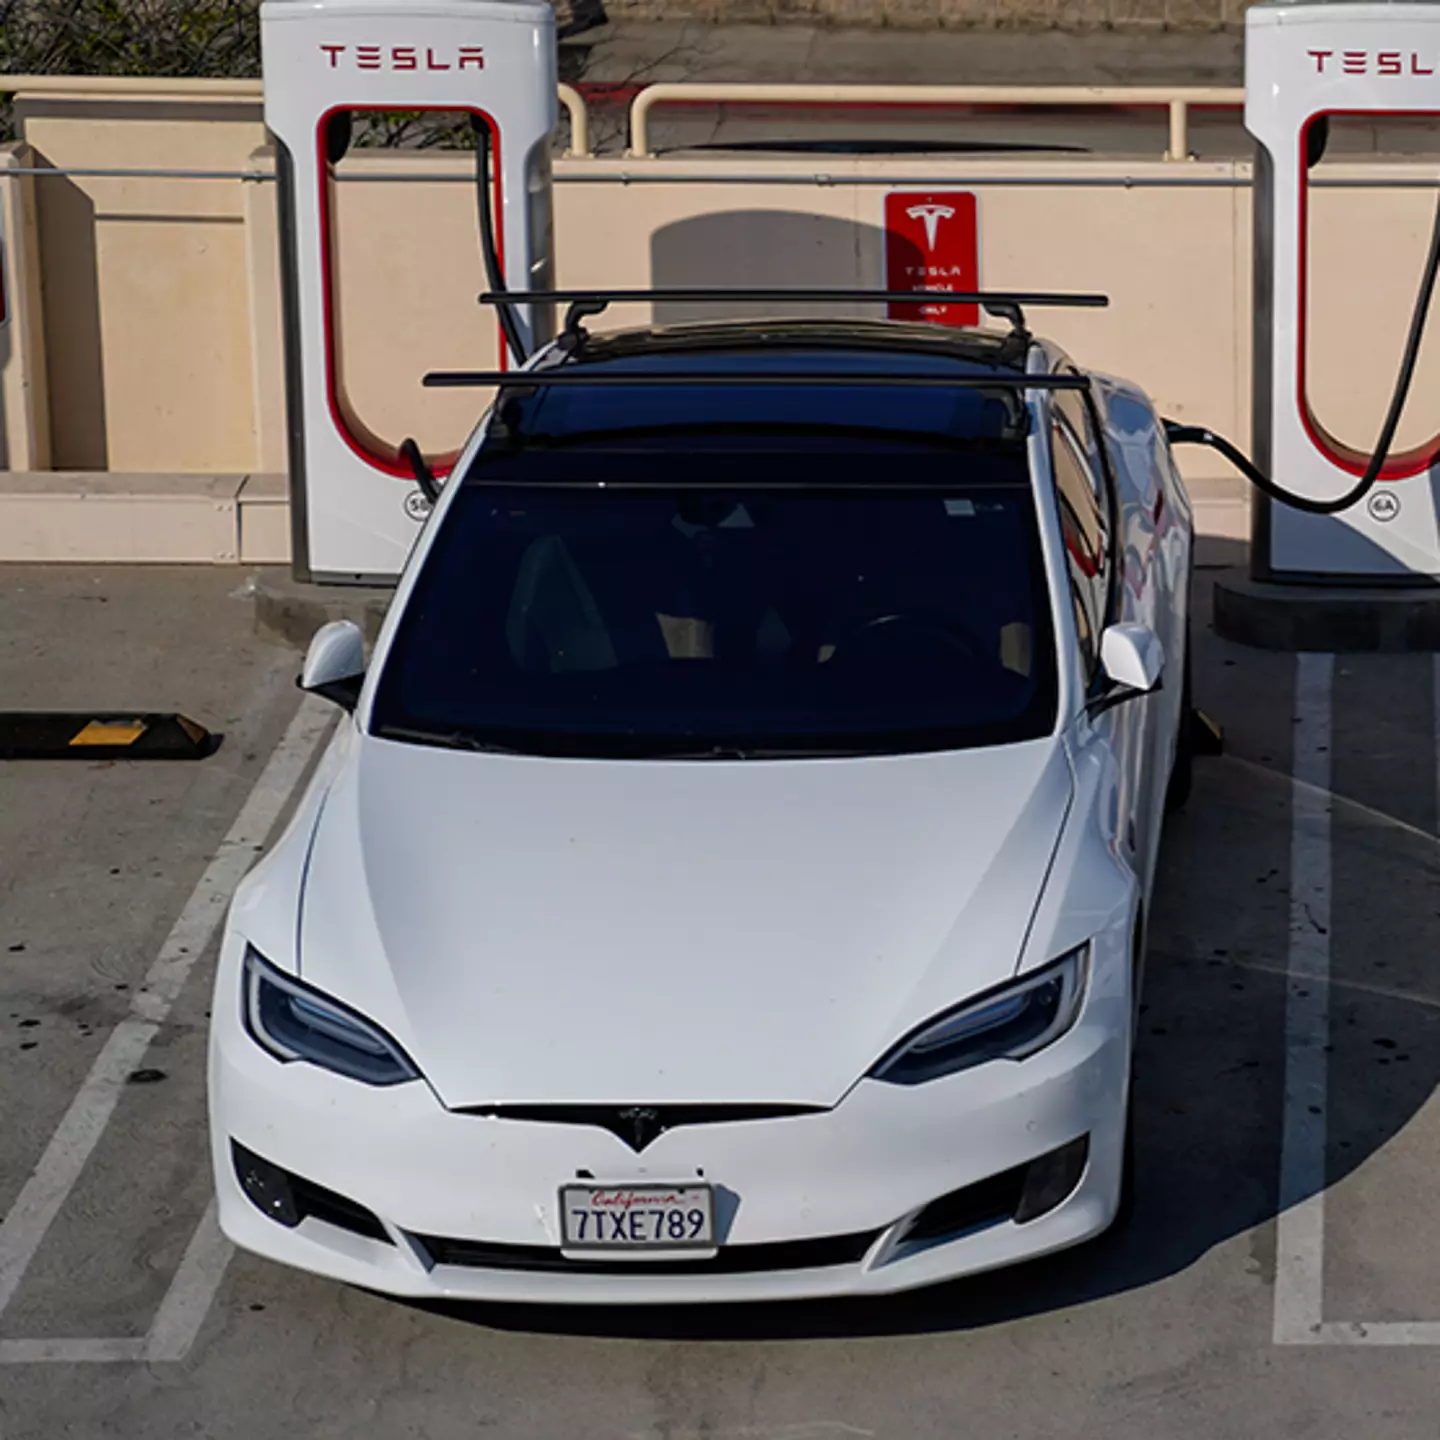 Tesla owner shares car’s first electric bill in 12 months and people can’t believe the price